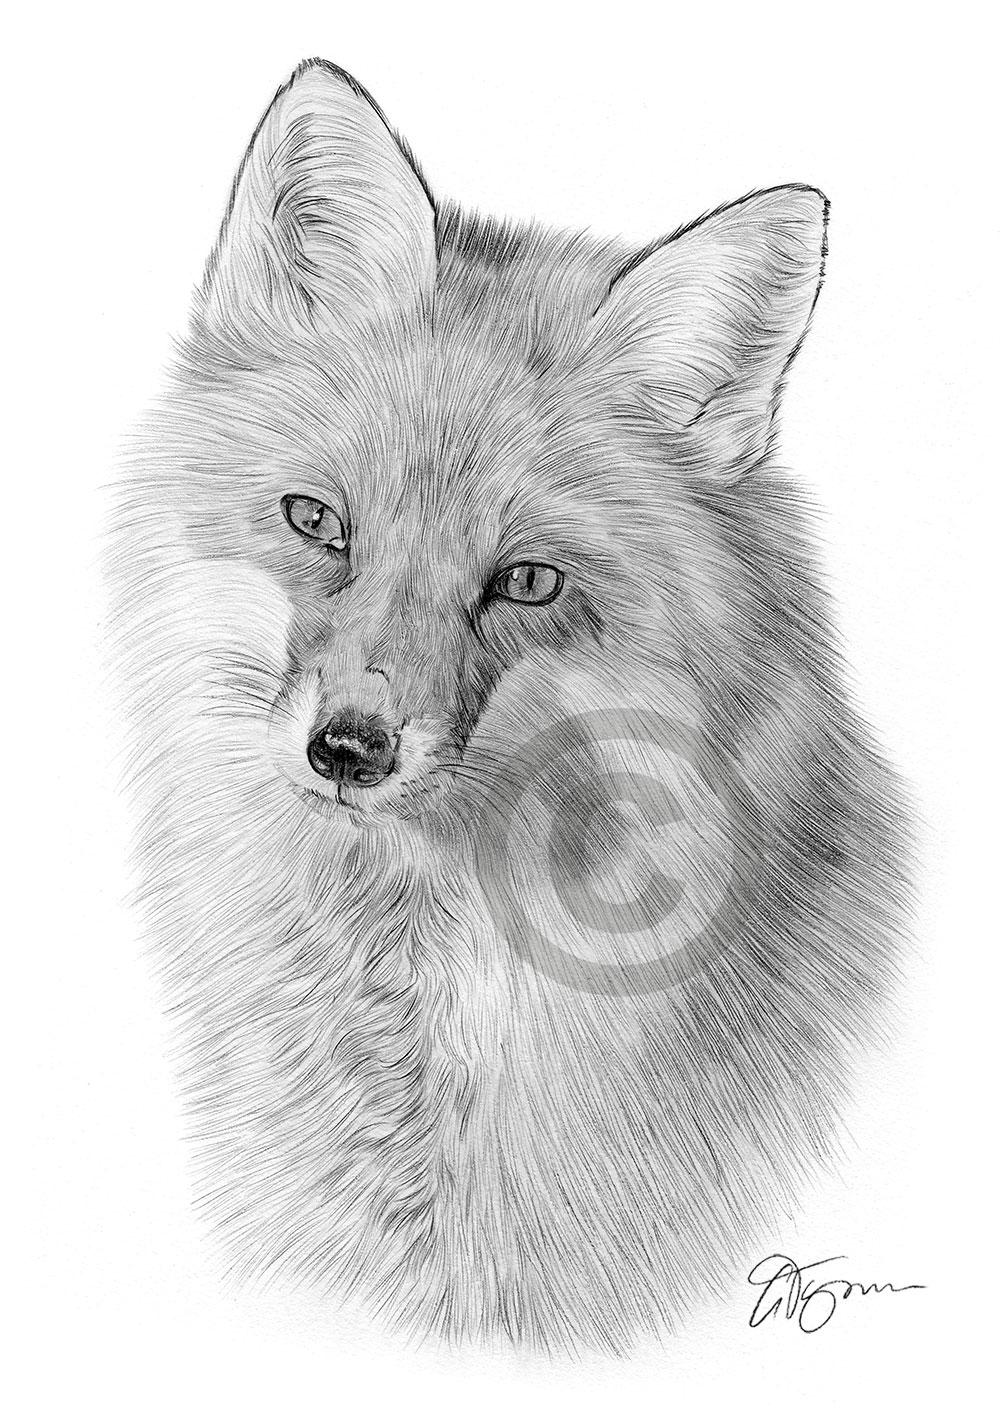 Pencil drawing of a young red fox by artist Gary Tymon